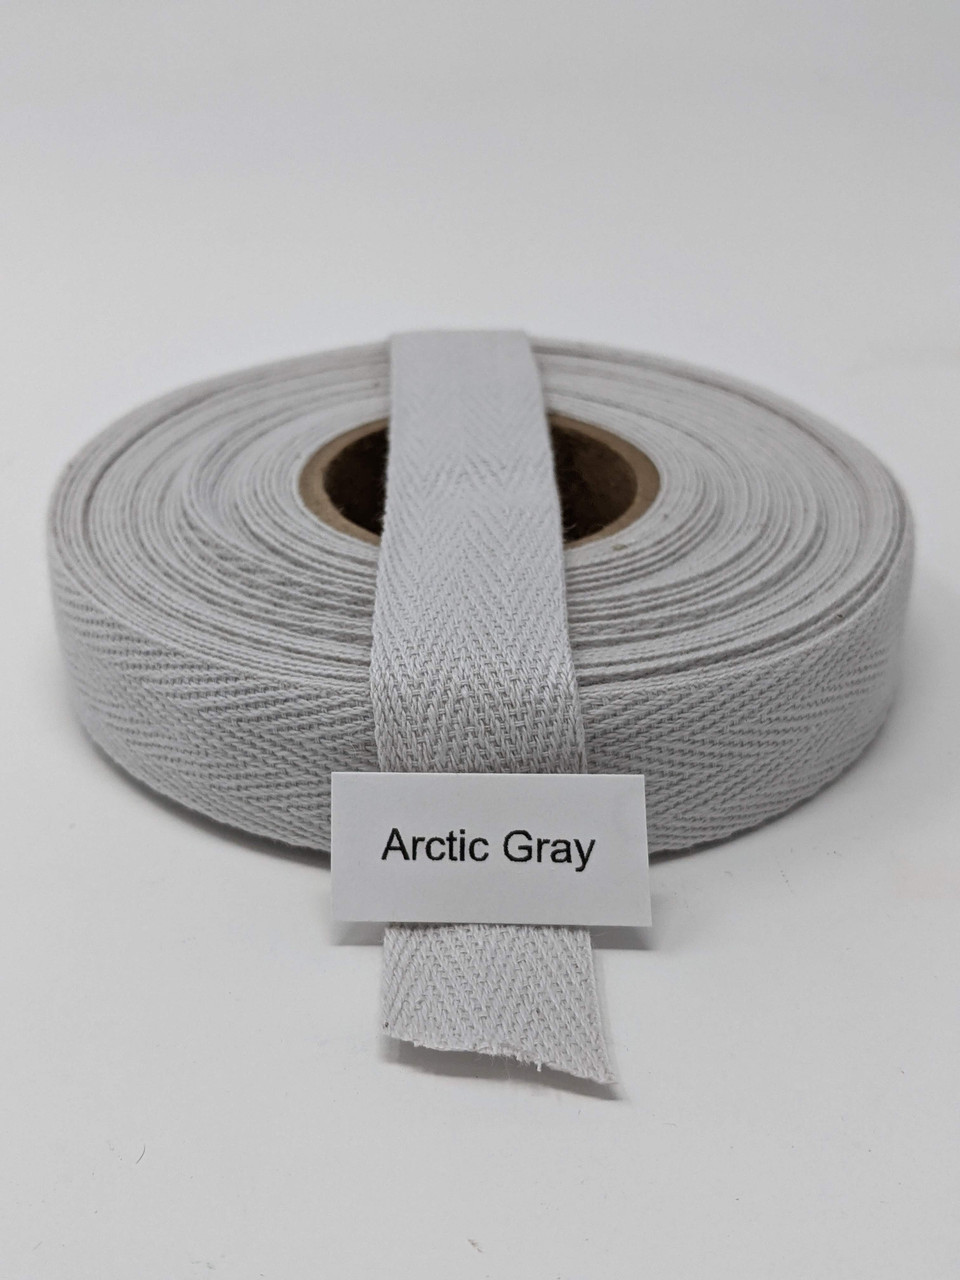 Cotton Twill Tape 3/4 Inch 50Yards Cotton Ribbon Bias Binding Tape for  Sewing Binding Gift Wrapping Craft Light Grey 